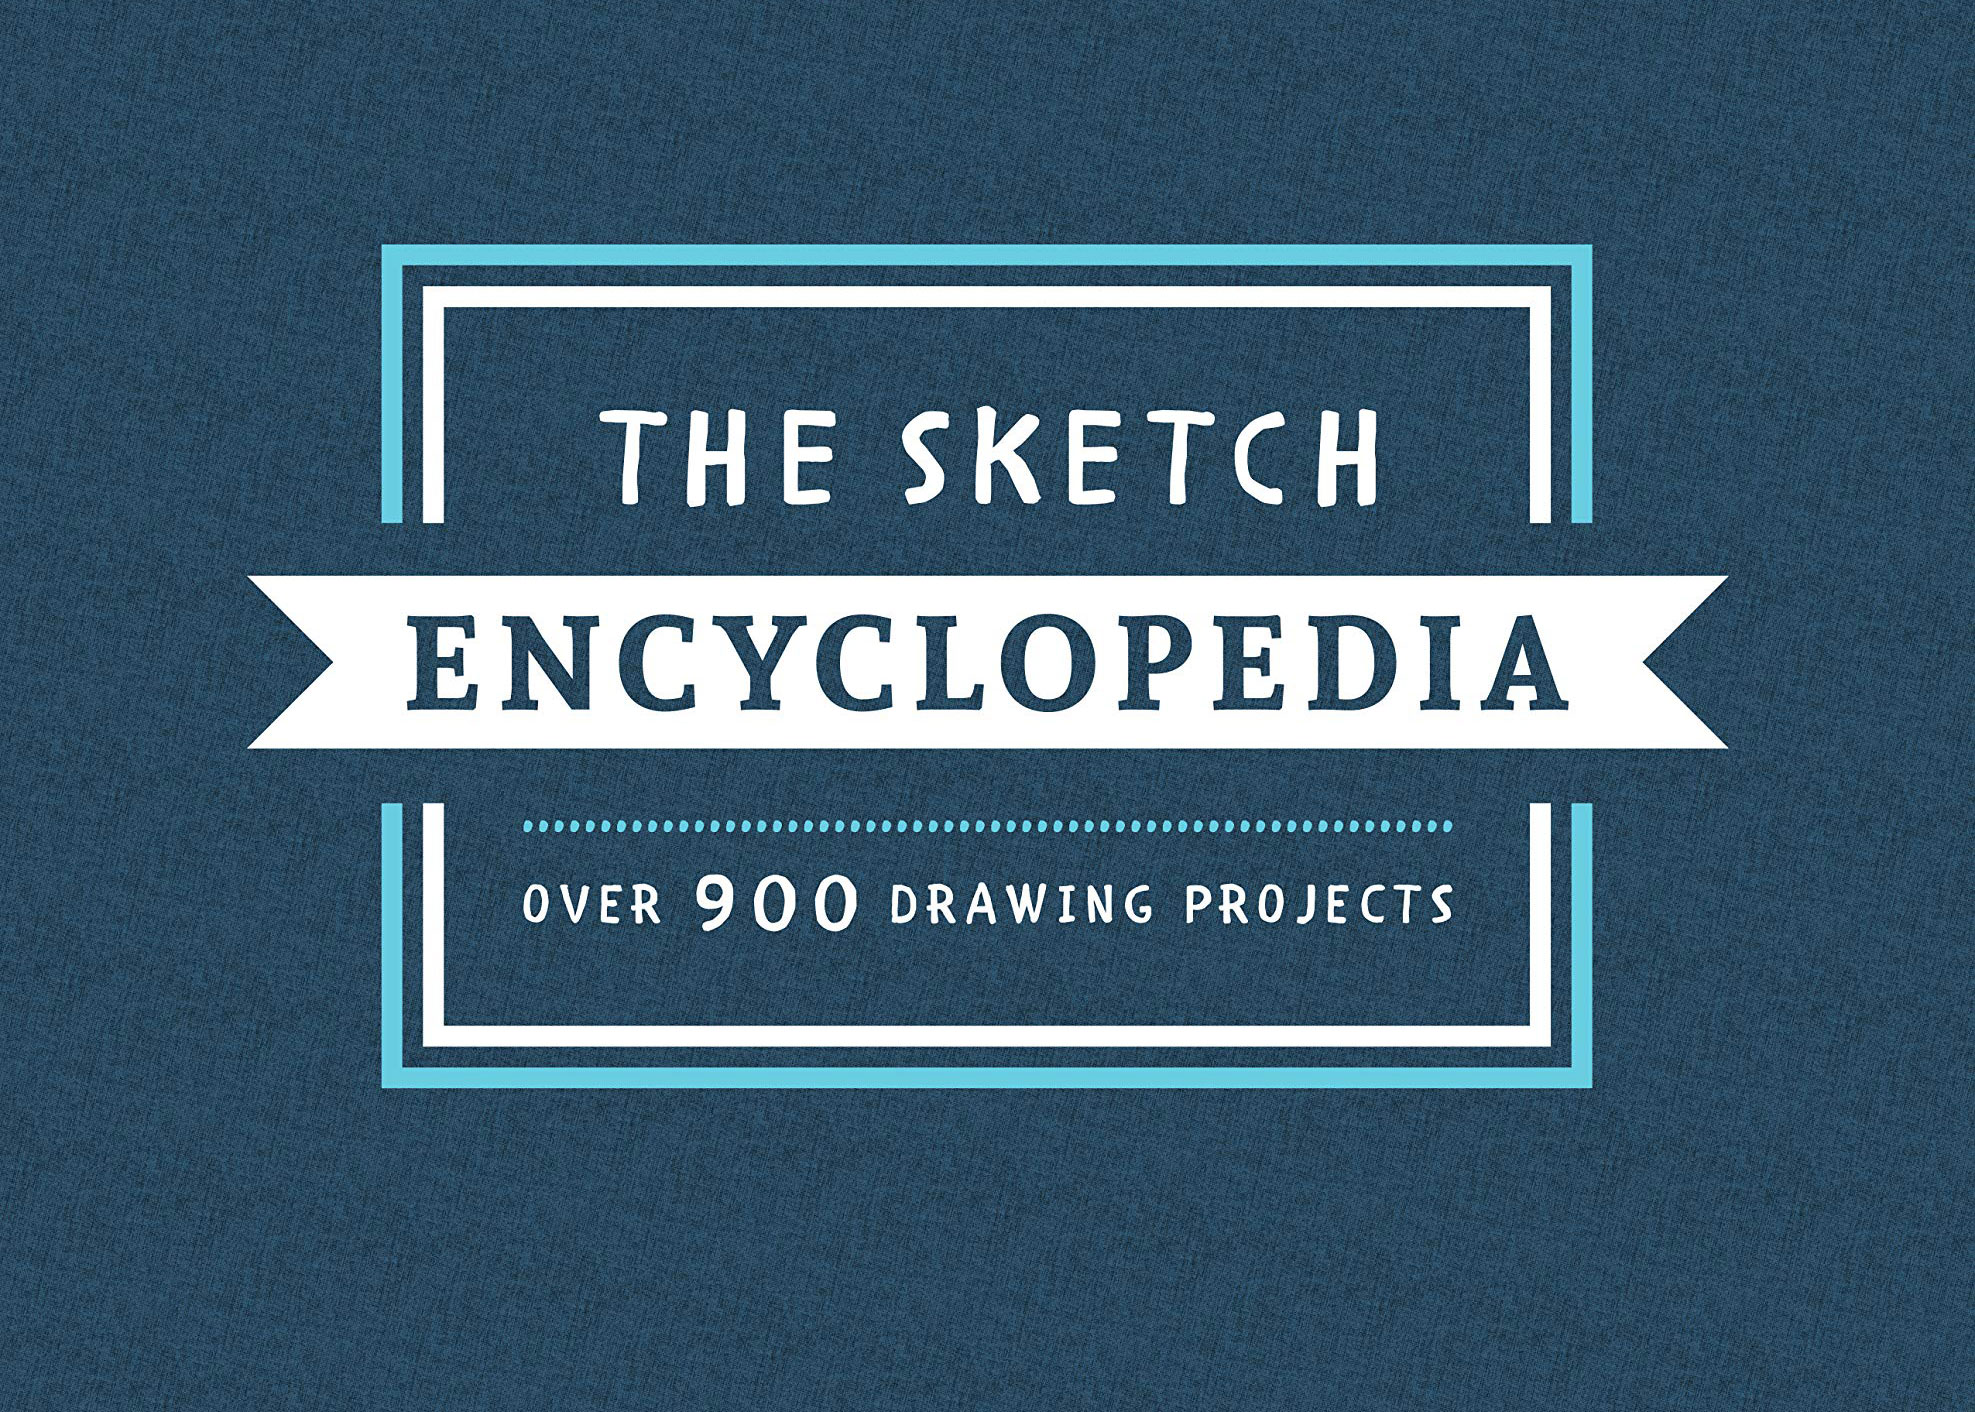 Best drawing books: The Sketch Encyclopedia